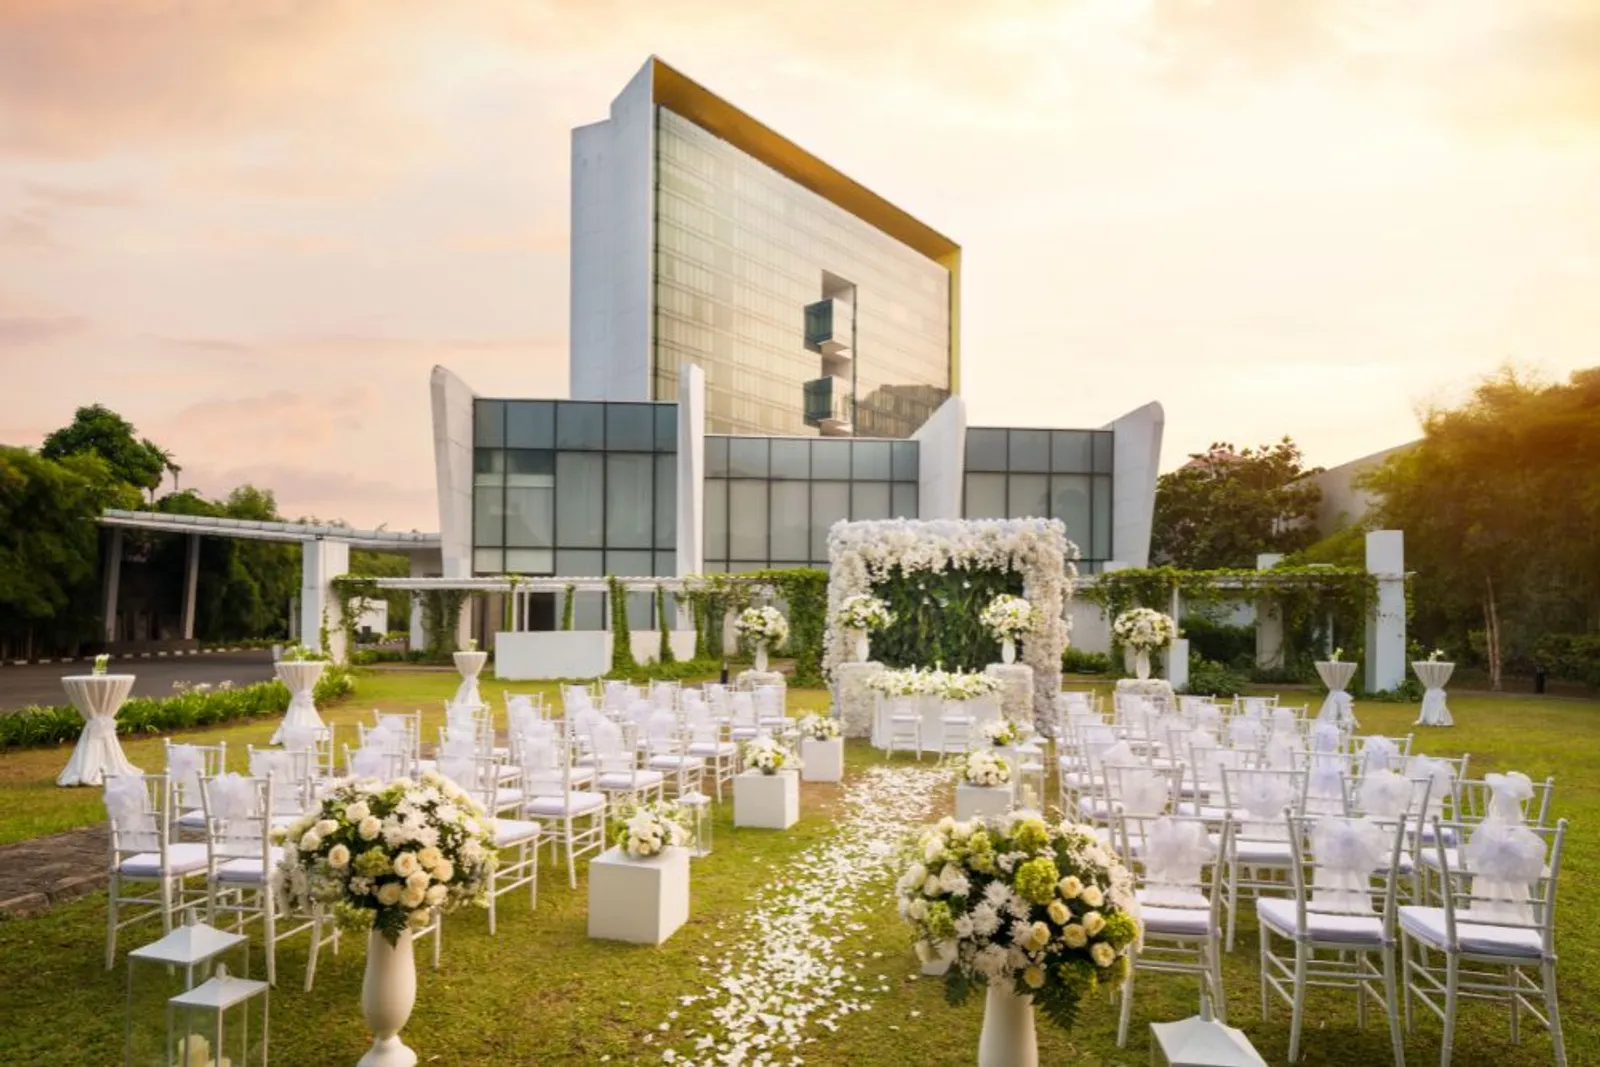 The Vow with Hilton Wedding Showcase by Bridestory Kembali Digelar